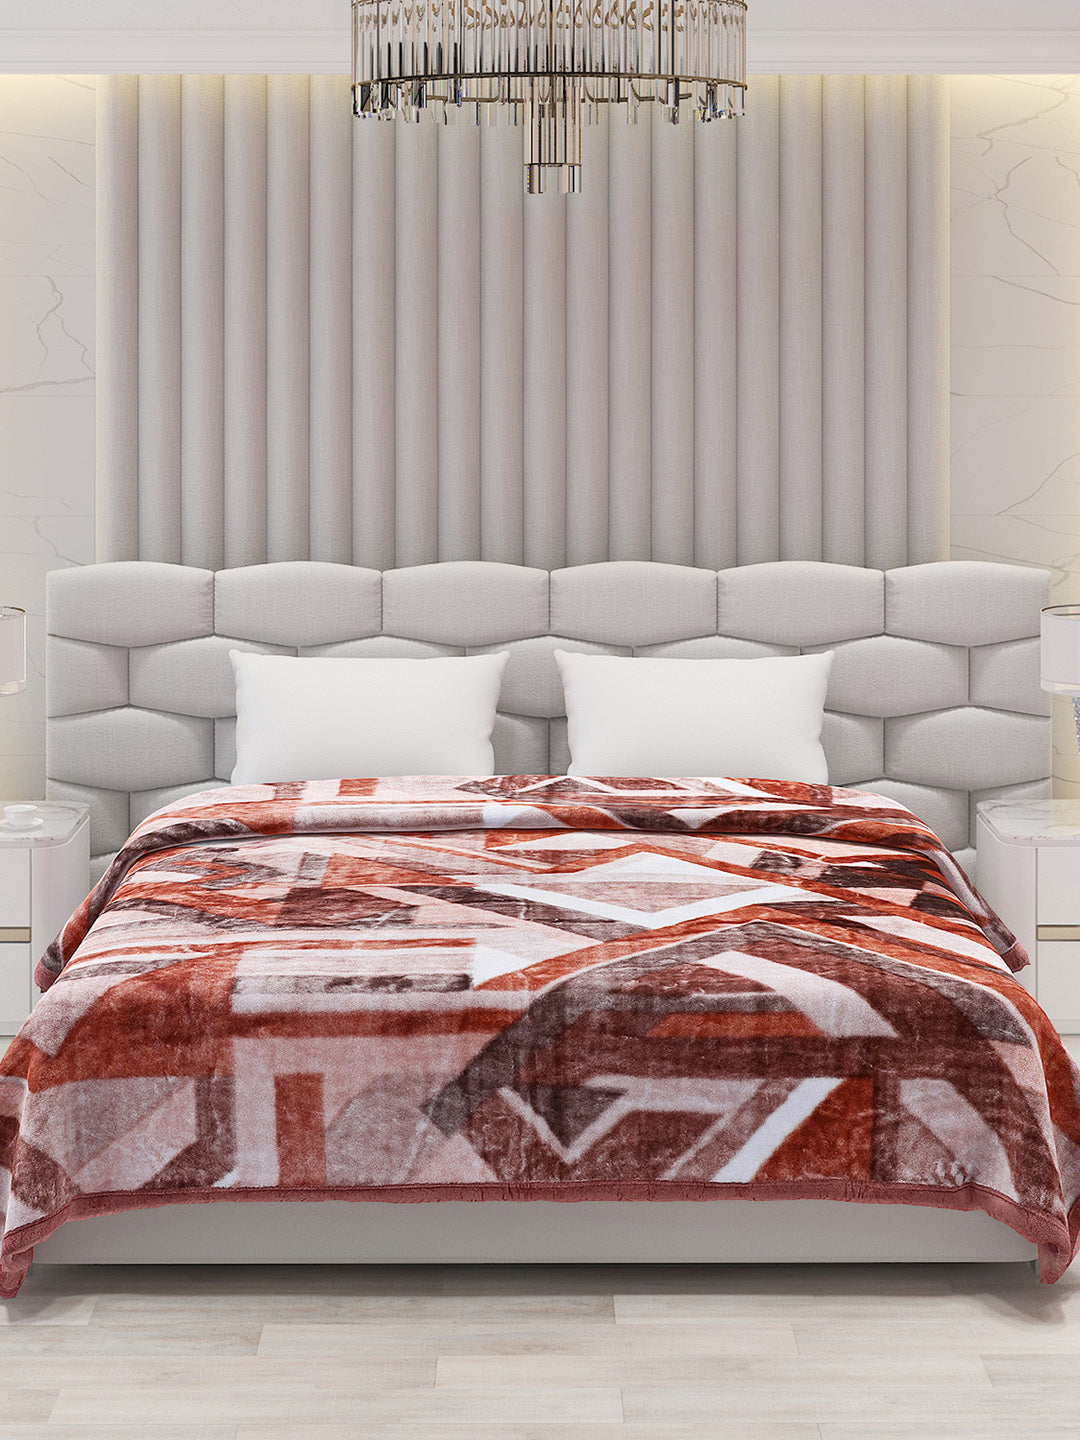 Printed Double Bed Blanket for Mild Winter -1 Ply